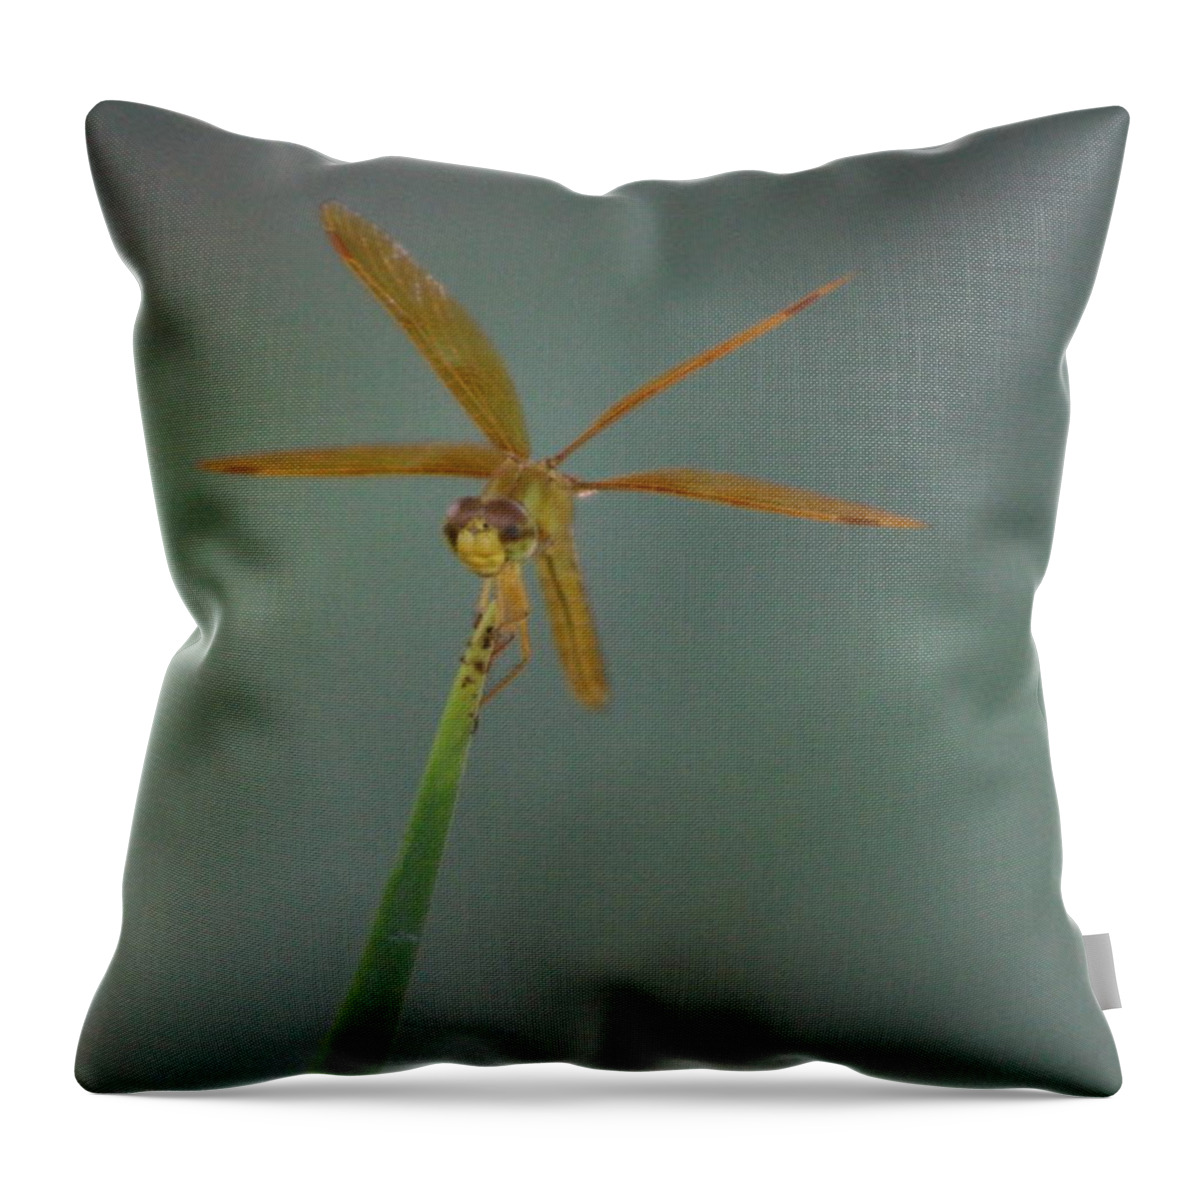 Macro Photography Throw Pillow featuring the photograph Macro Photography Front View Golden Amberwing Dragonfly - Front View by Colleen Cornelius